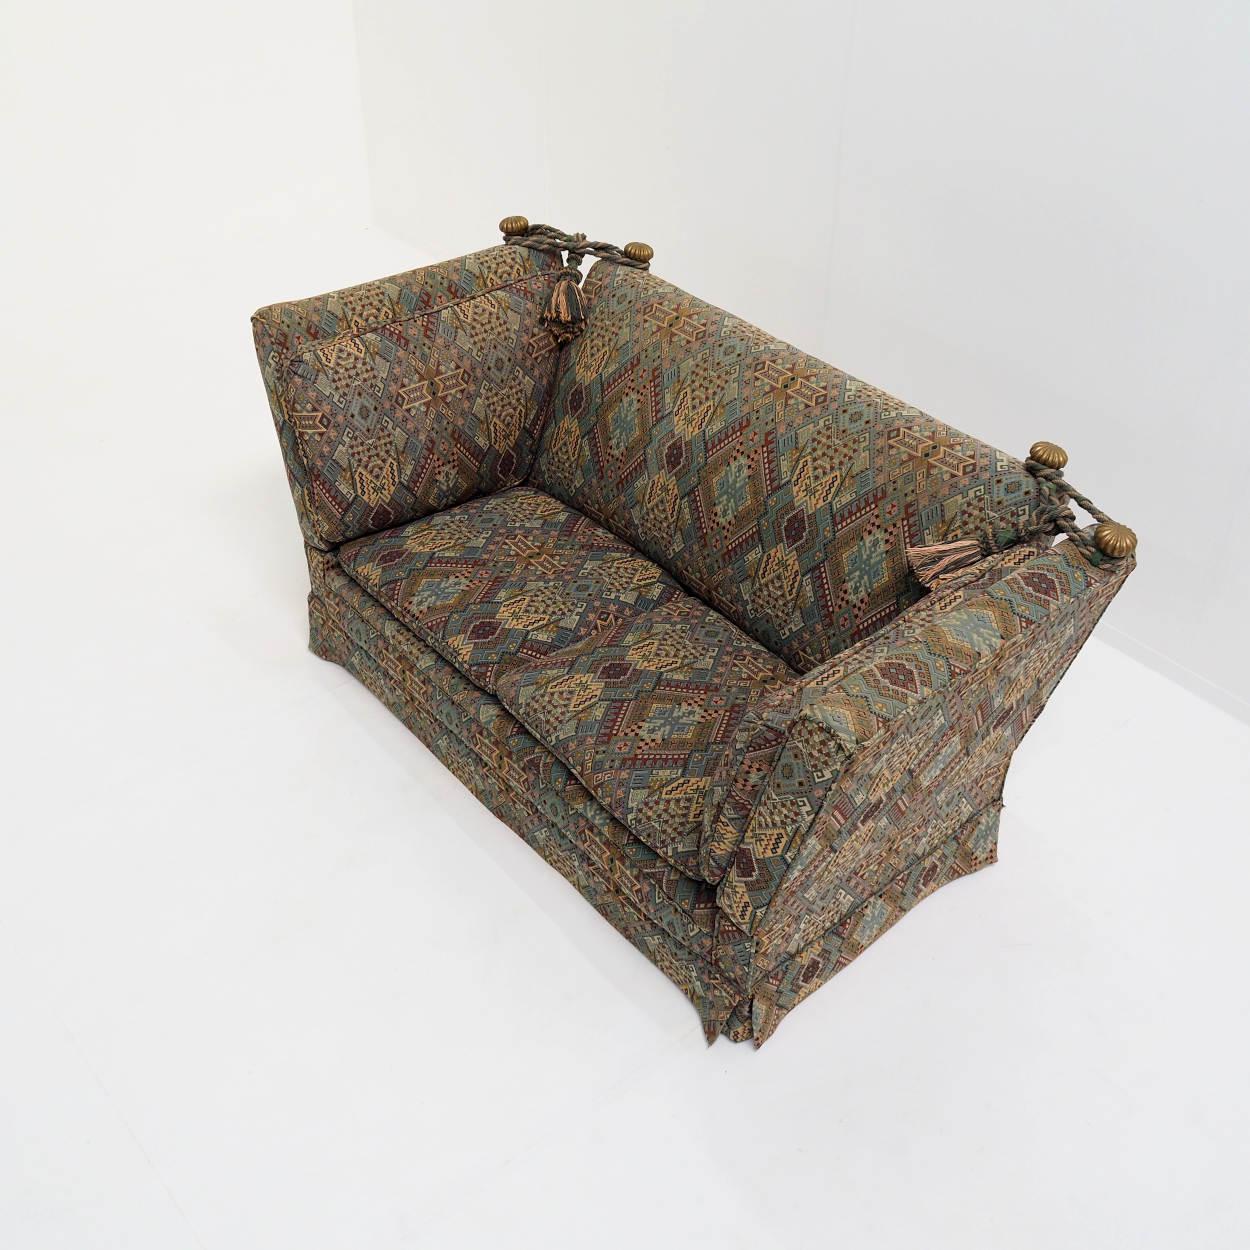 The Knole sofa, which takes its name from a village in Kent, is said to be one of the first upholstered seating furniture in England (we are talking about the 17th century). 

This sofa was specially shipped from Belgium to England by the previous